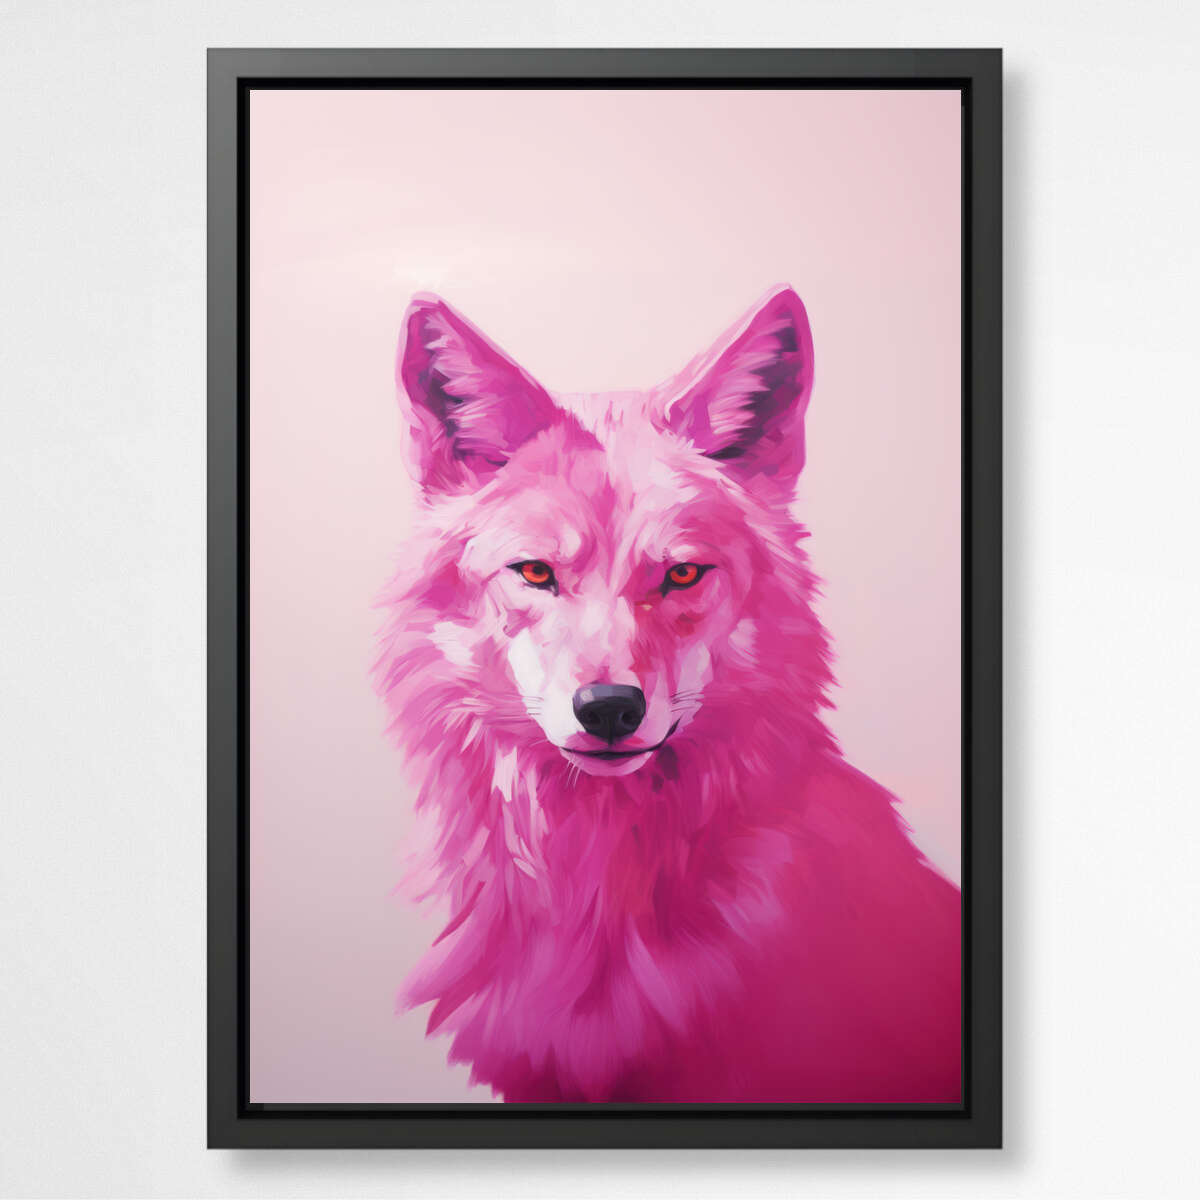 Pinky Wolf | Animal Wall Art Prints - The Canvas Hive